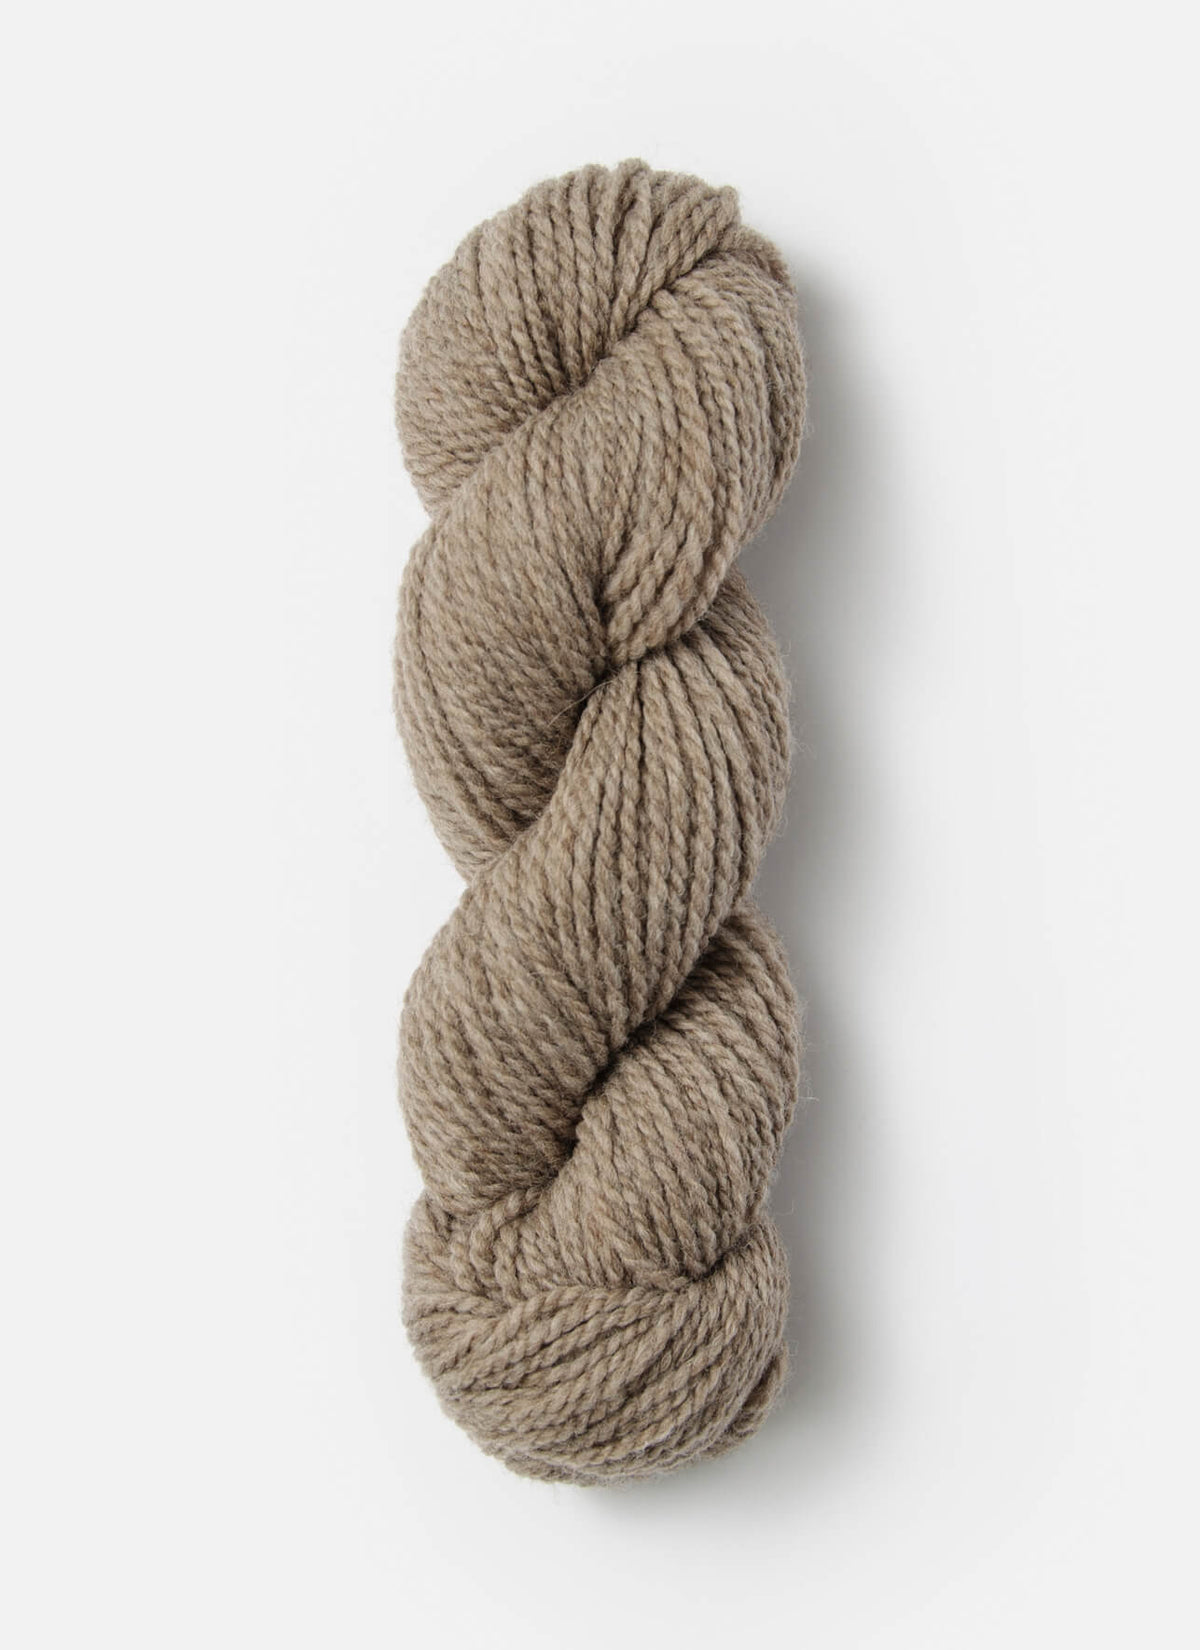 Earth & Sky - Hand dyed yarn - SW Merino Fingering Weight brown carame